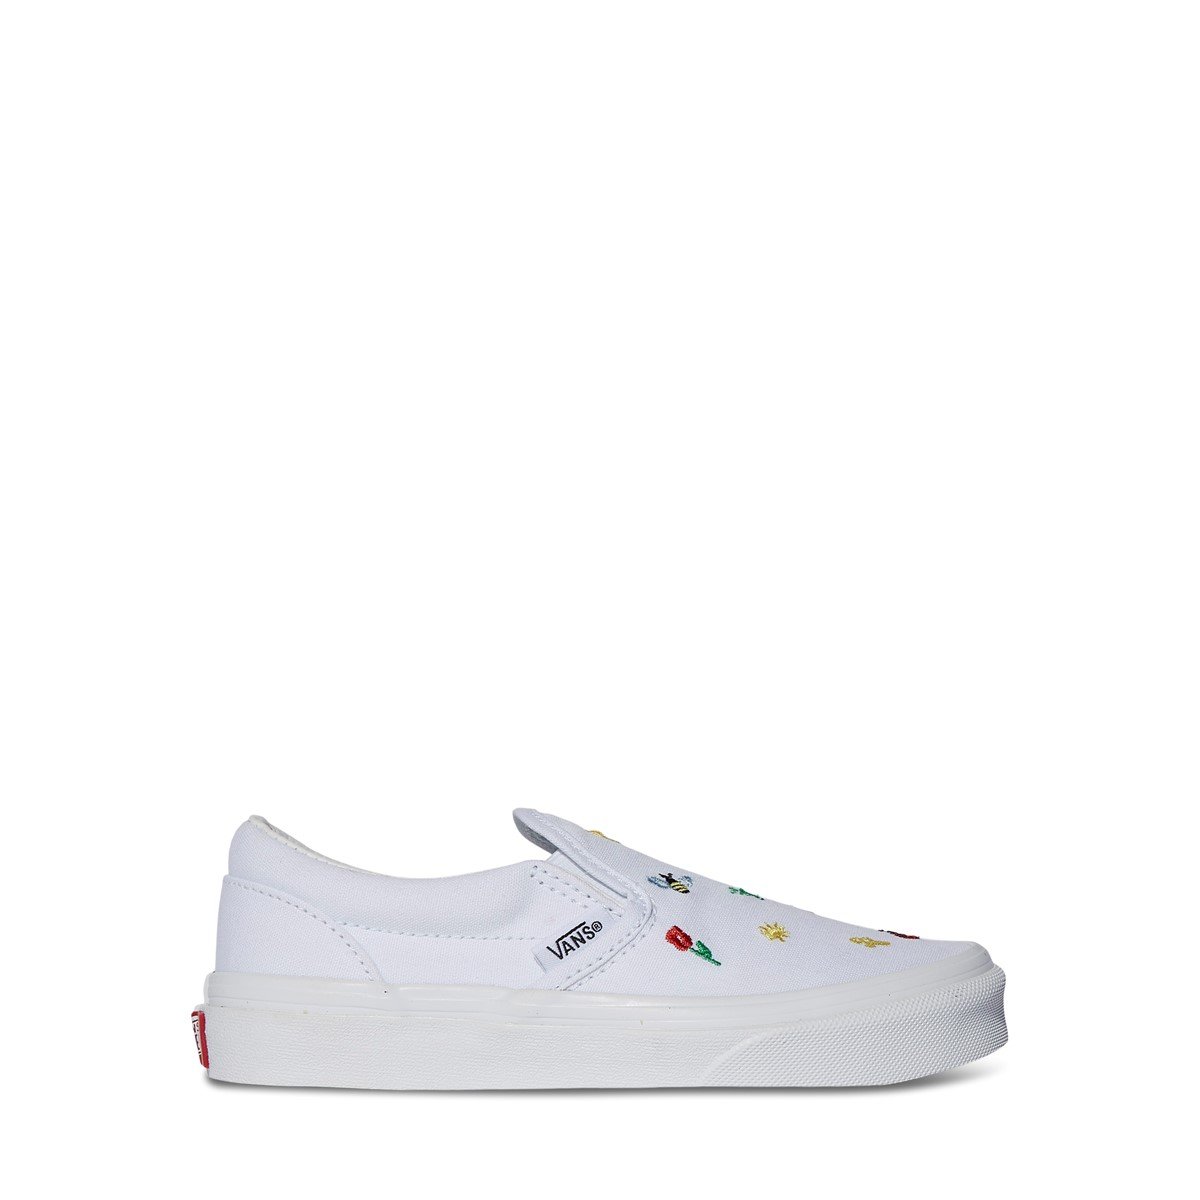 Little Kids' Garden Party Classic Slip-On Shoes in White